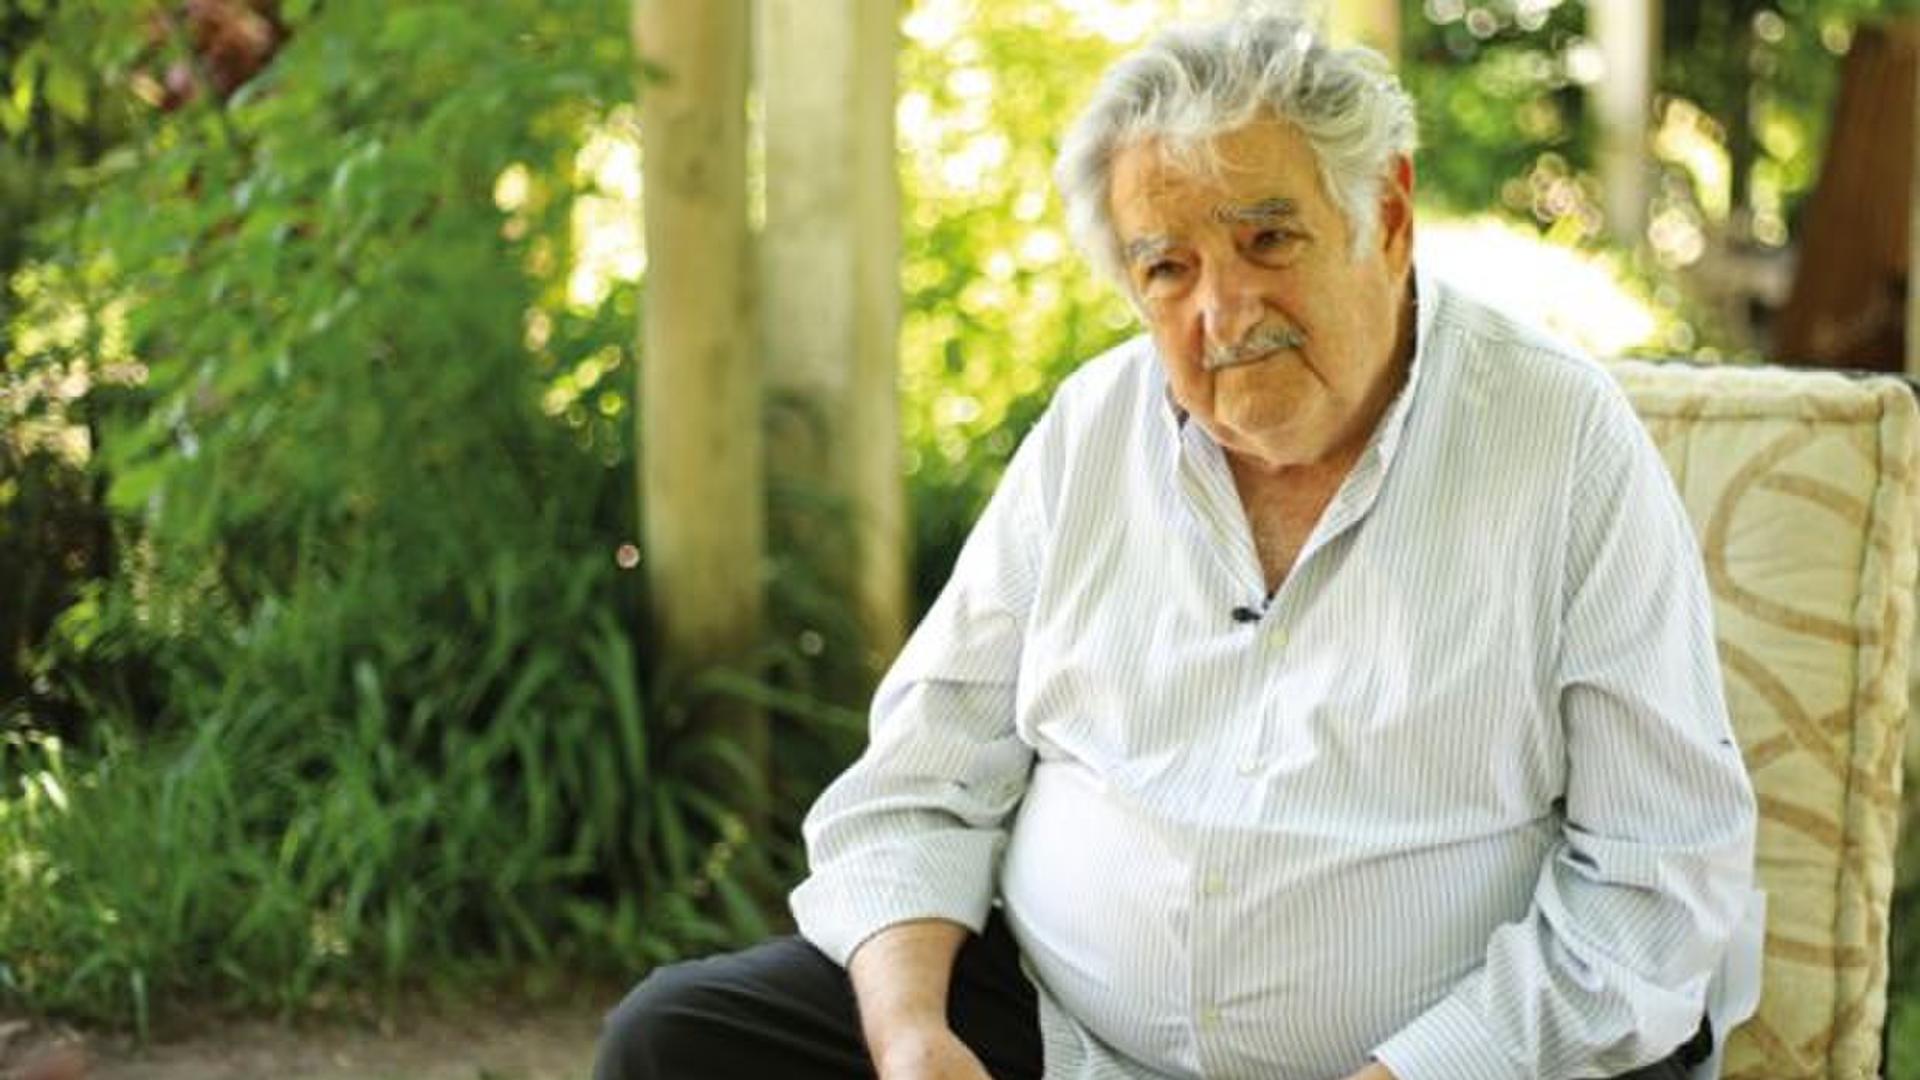 Moments with Mujica